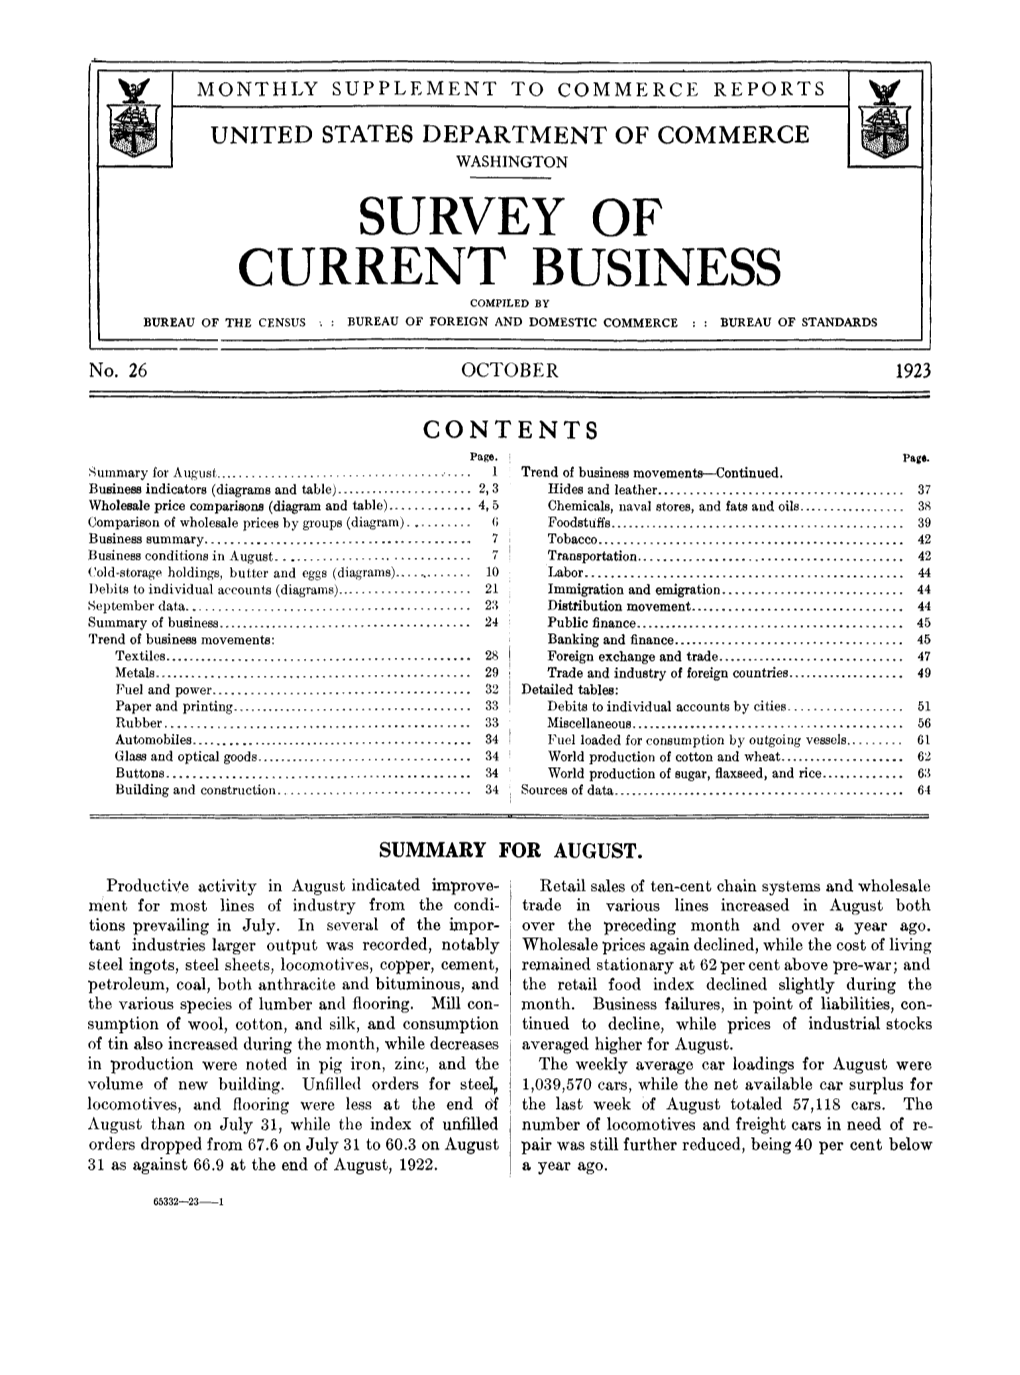 Survey of Current Business October 1923